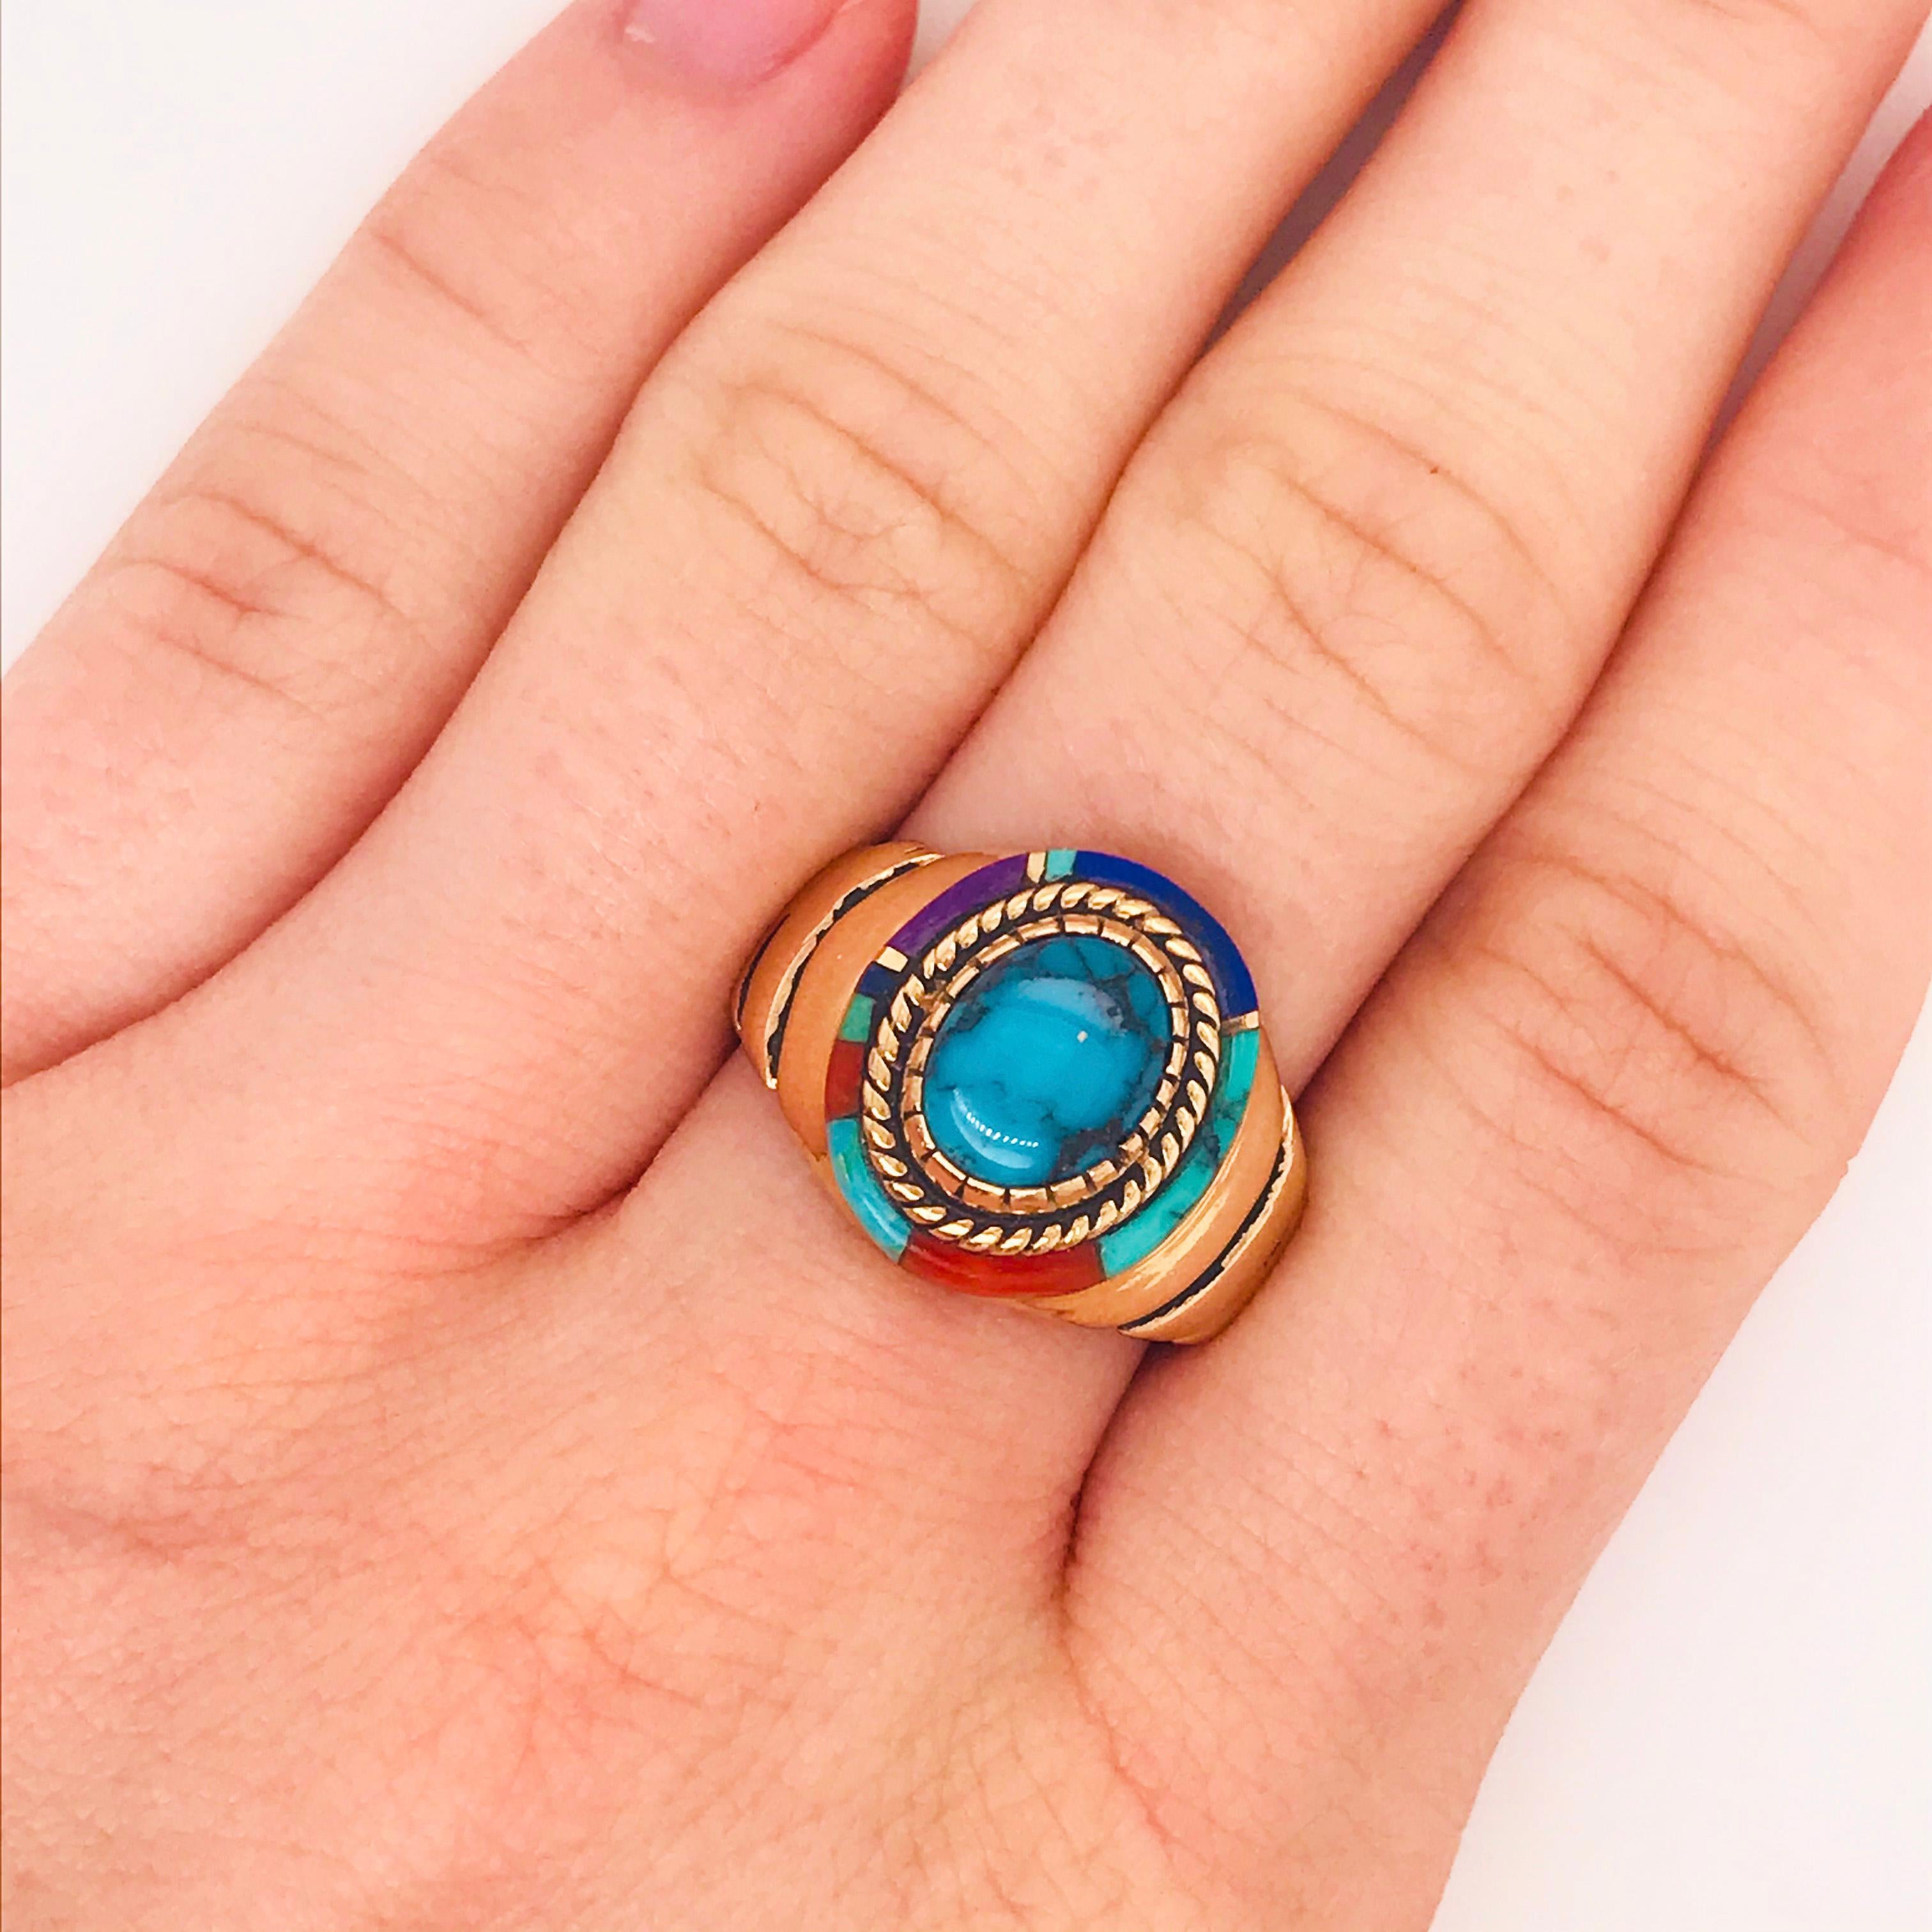 This one of a kind ring has the most unique design! This is a bold fashion ring that has been hand crafted with beautiful natural gemstones. In the center is an oval piece of gorgeous genuine turquoise that is set in a textured bezel setting.